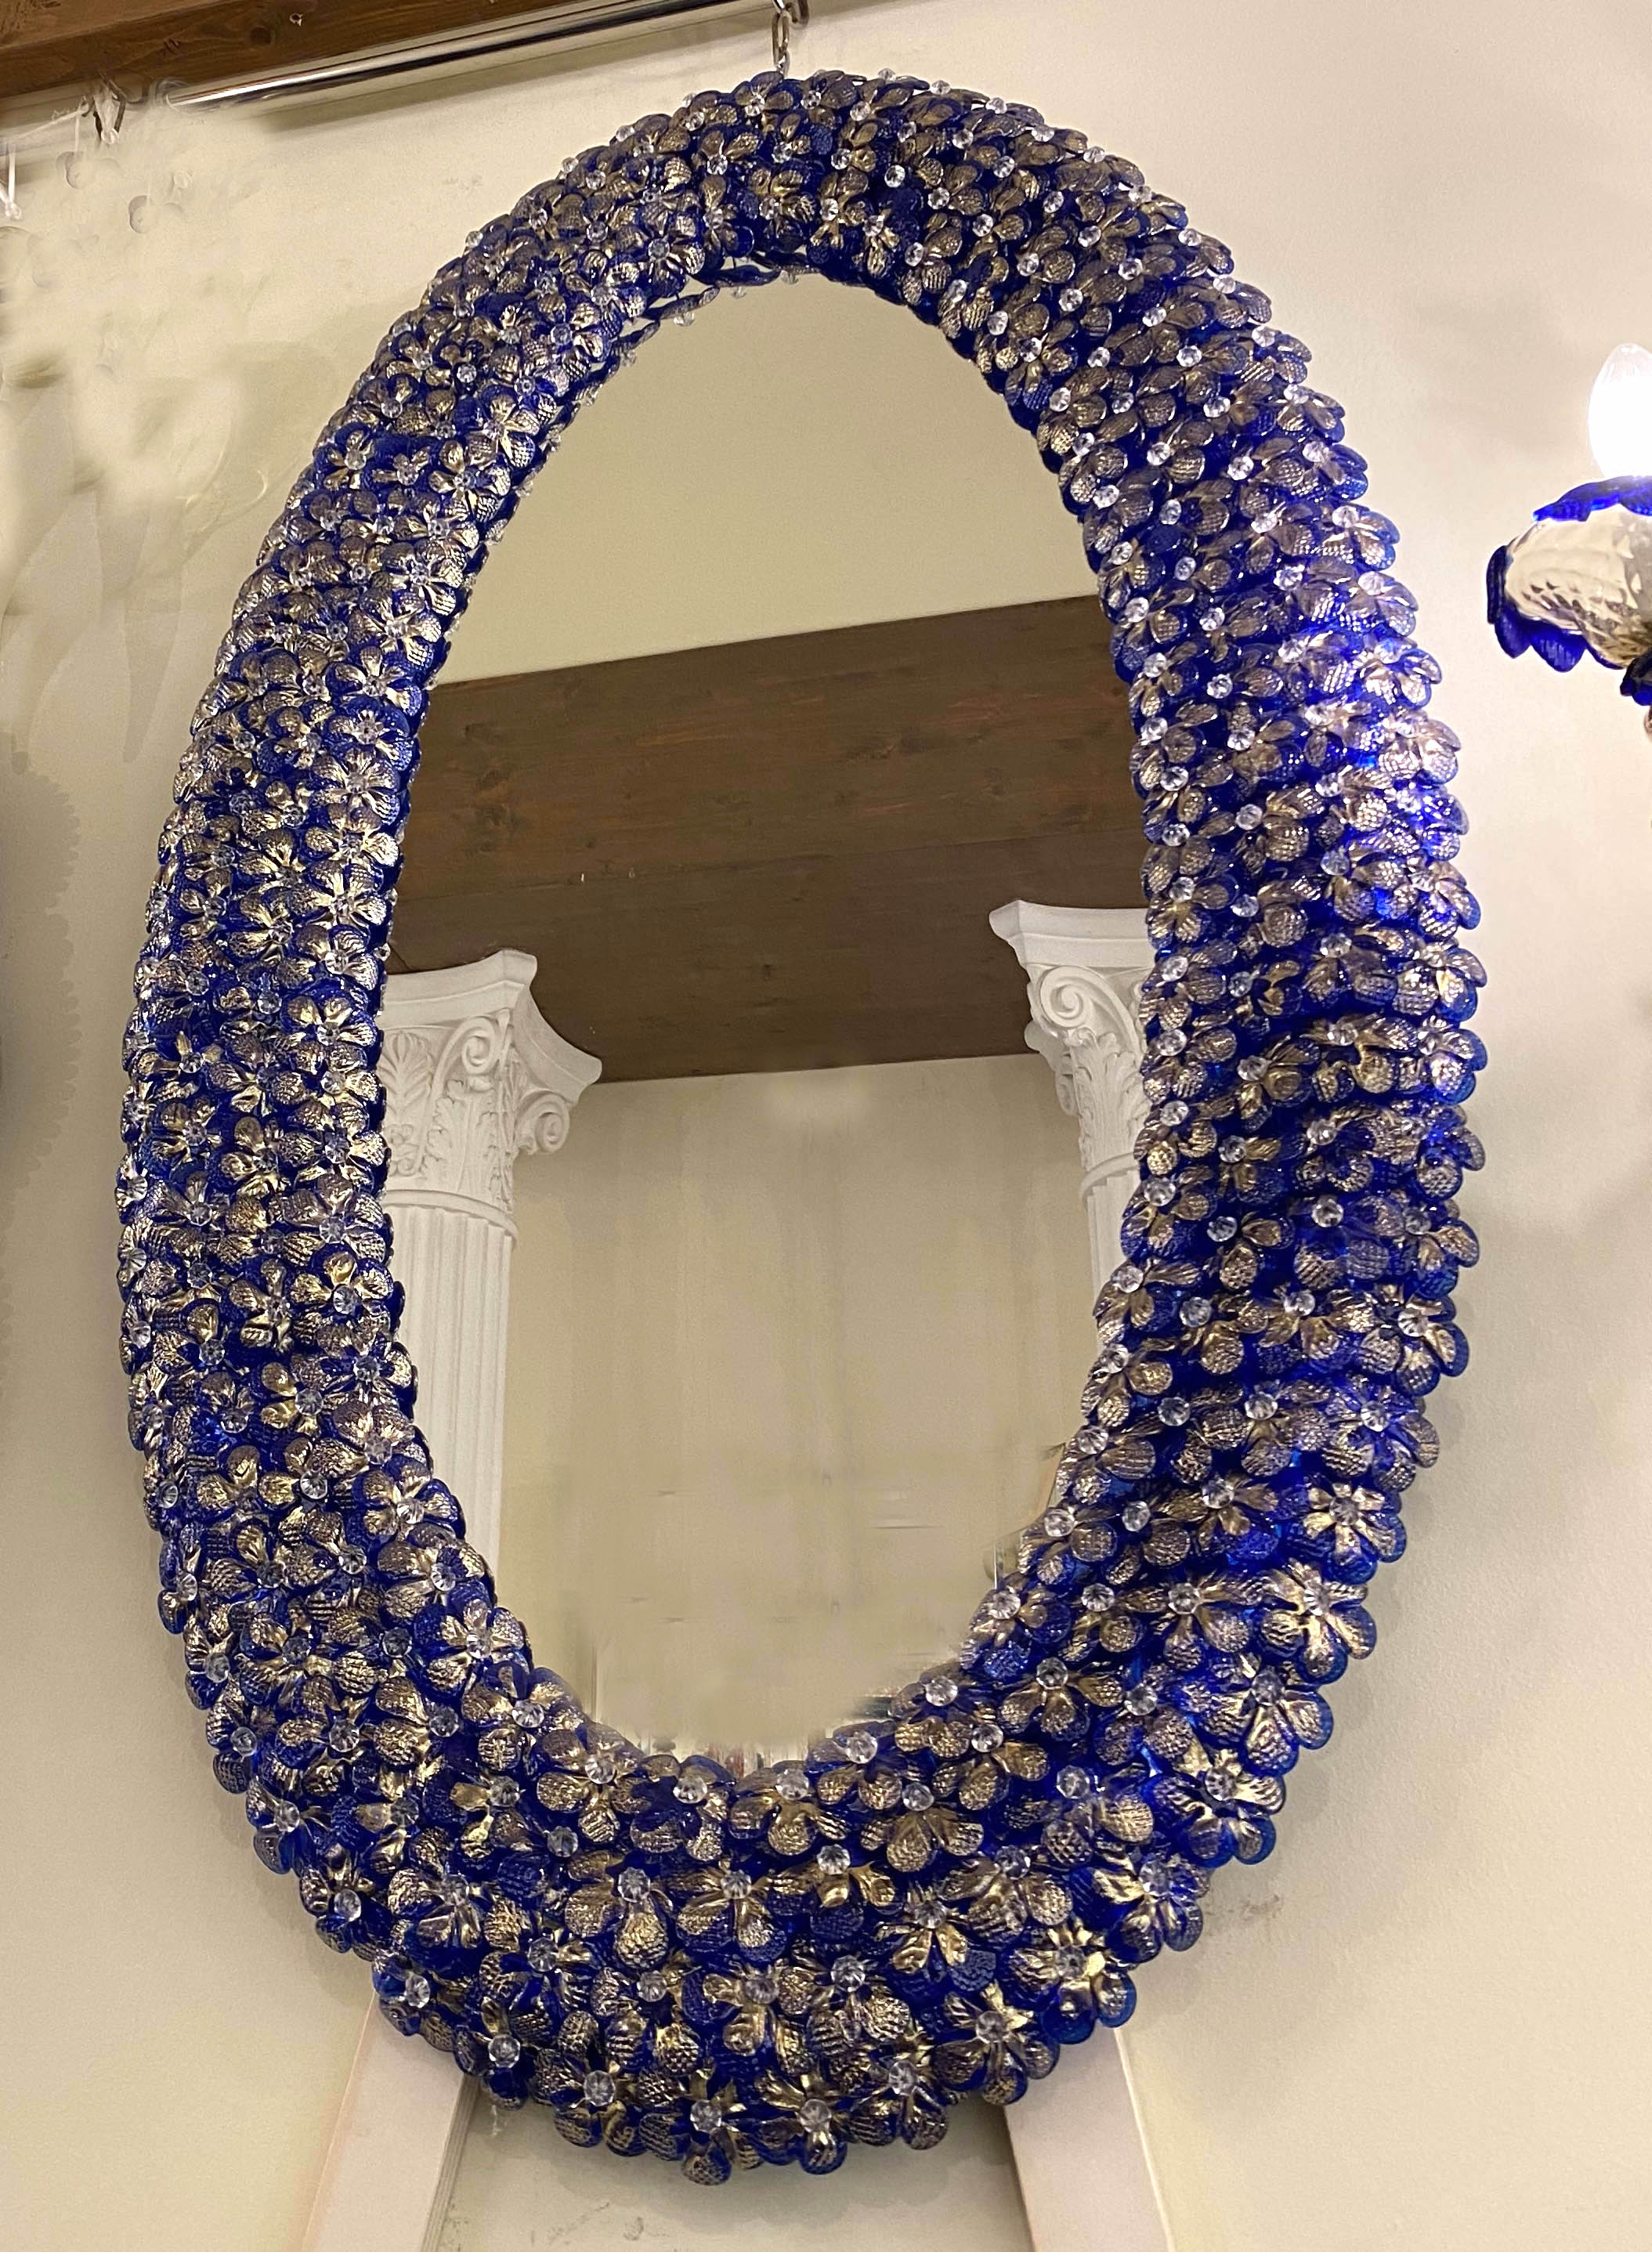 Oval Shaped Delicious Blu Flower Murano Glass Mirror In Excellent Condition For Sale In Rome, IT